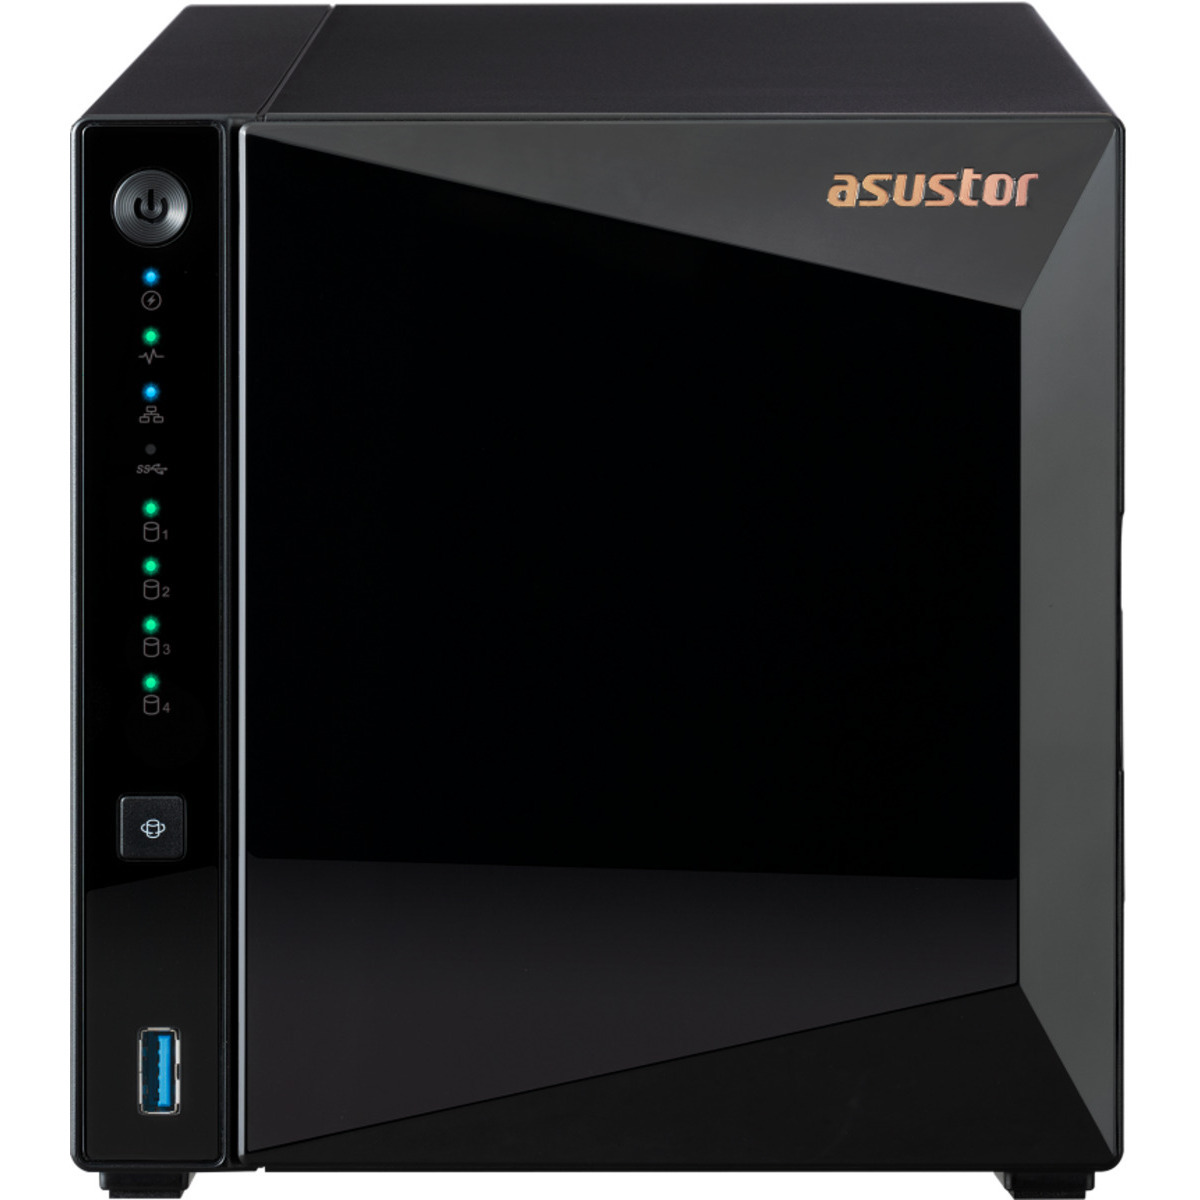 ASUSTOR DRIVESTOR 4 Pro AS3304T 48tb 4-Bay Desktop Personal / Basic Home / Small Office NAS - Network Attached Storage Device 4x12tb Seagate IronWolf Pro ST12000NT001 3.5 7200rpm SATA 6Gb/s HDD NAS Class Drives Installed - Burn-In Tested - ON SALE DRIVESTOR 4 Pro AS3304T